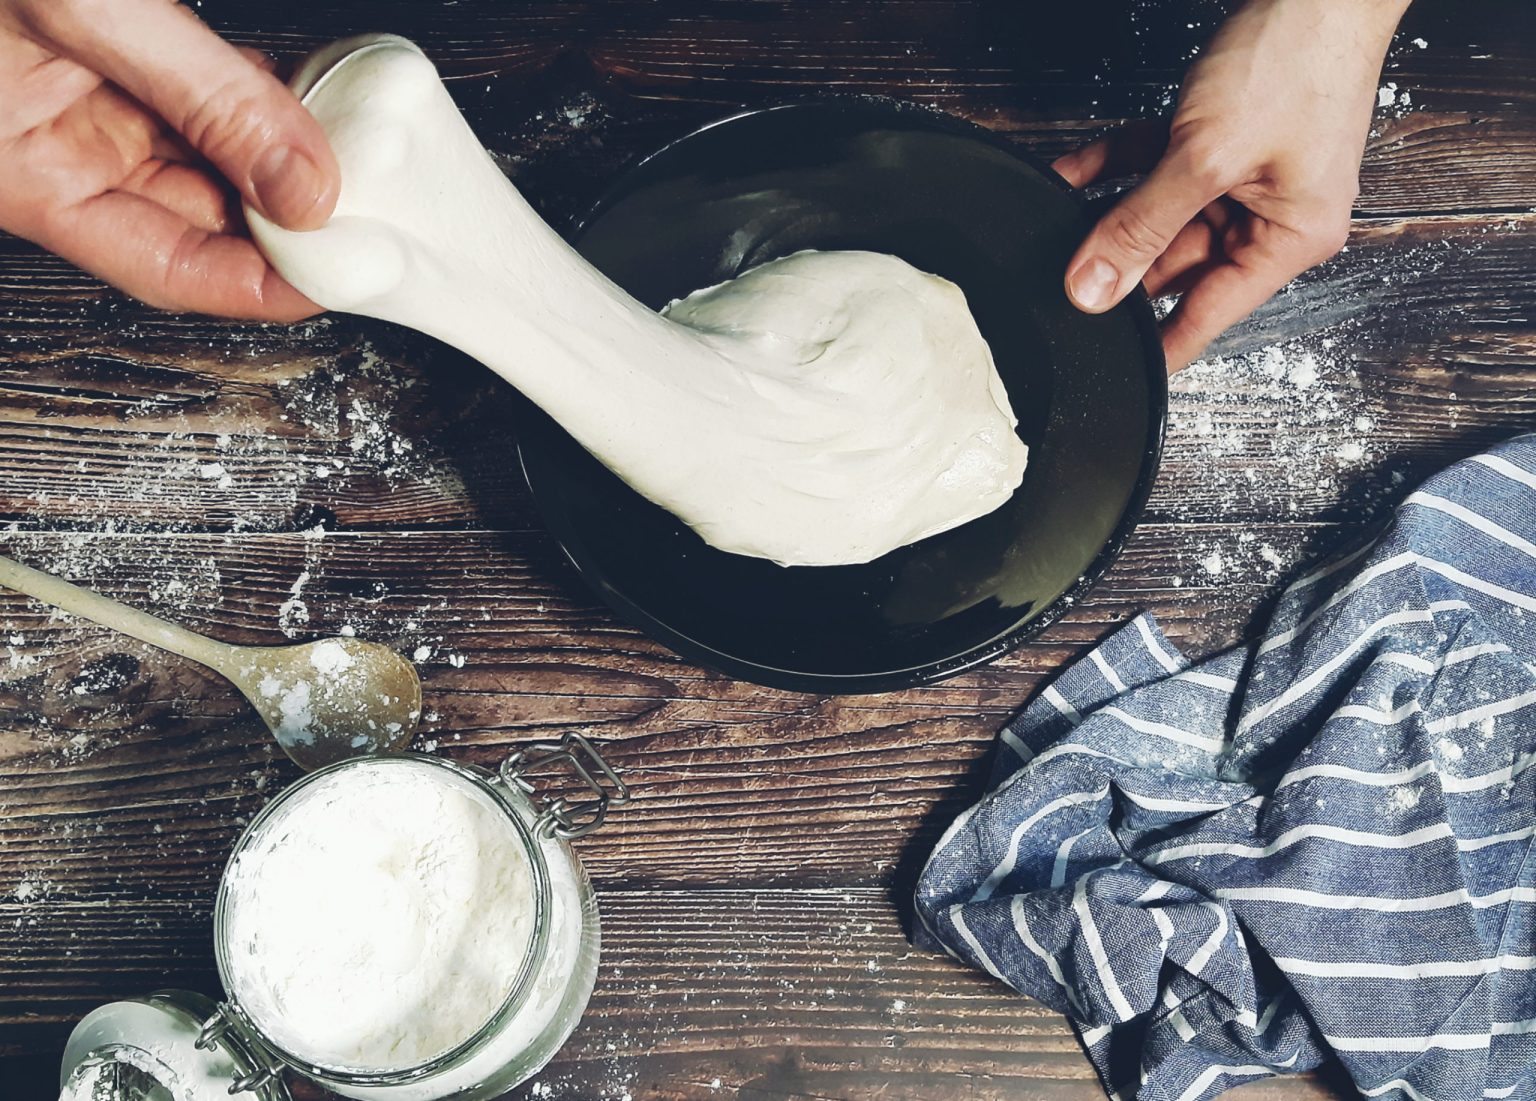 Hands stretching pizza dough from a bowl